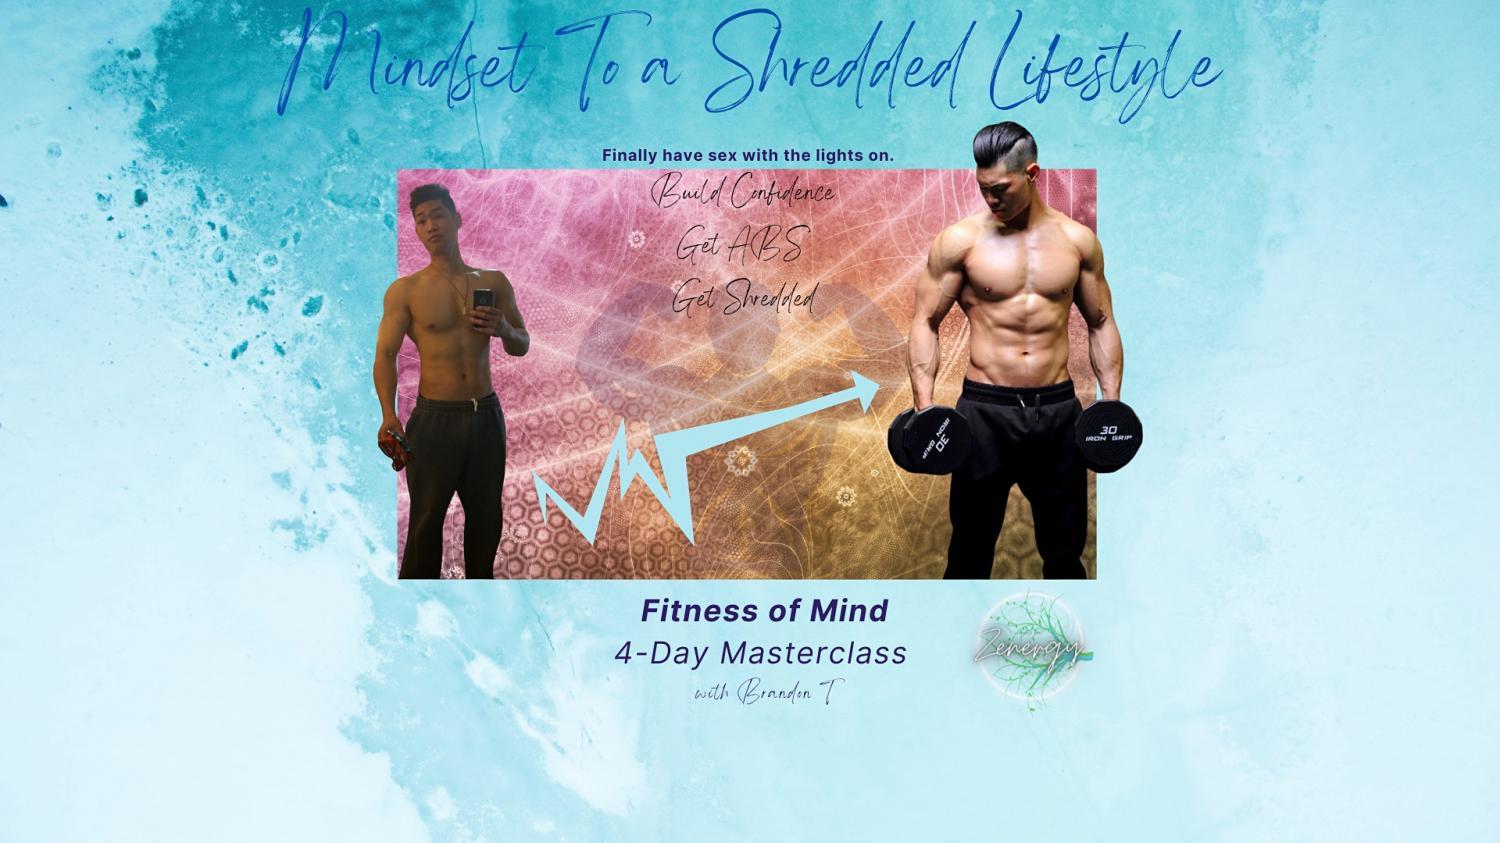 Get Shredded by Transforming Your Lifestyle - Cape Coral
Tue Nov 1, 2:00 PM - Tue Nov 1, 3:00 PM
in 11 days